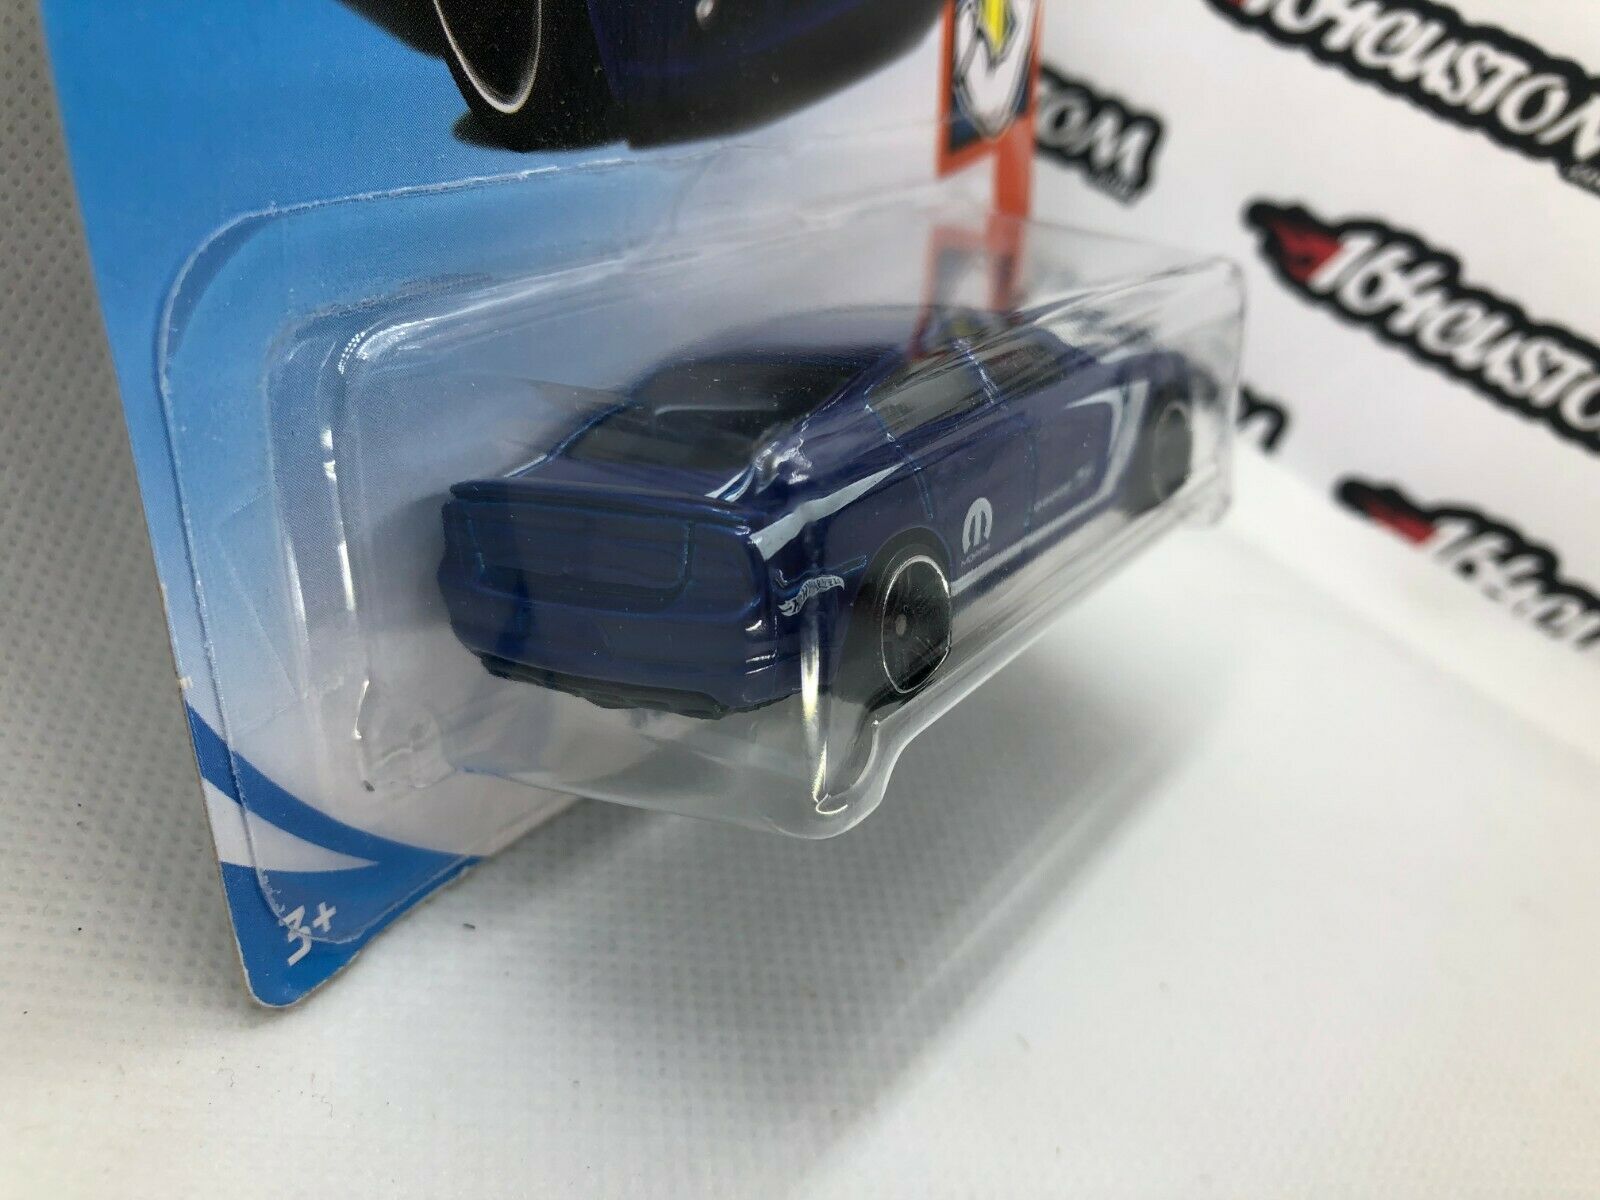 '11 Dodge Charger R/T Hot Wheels